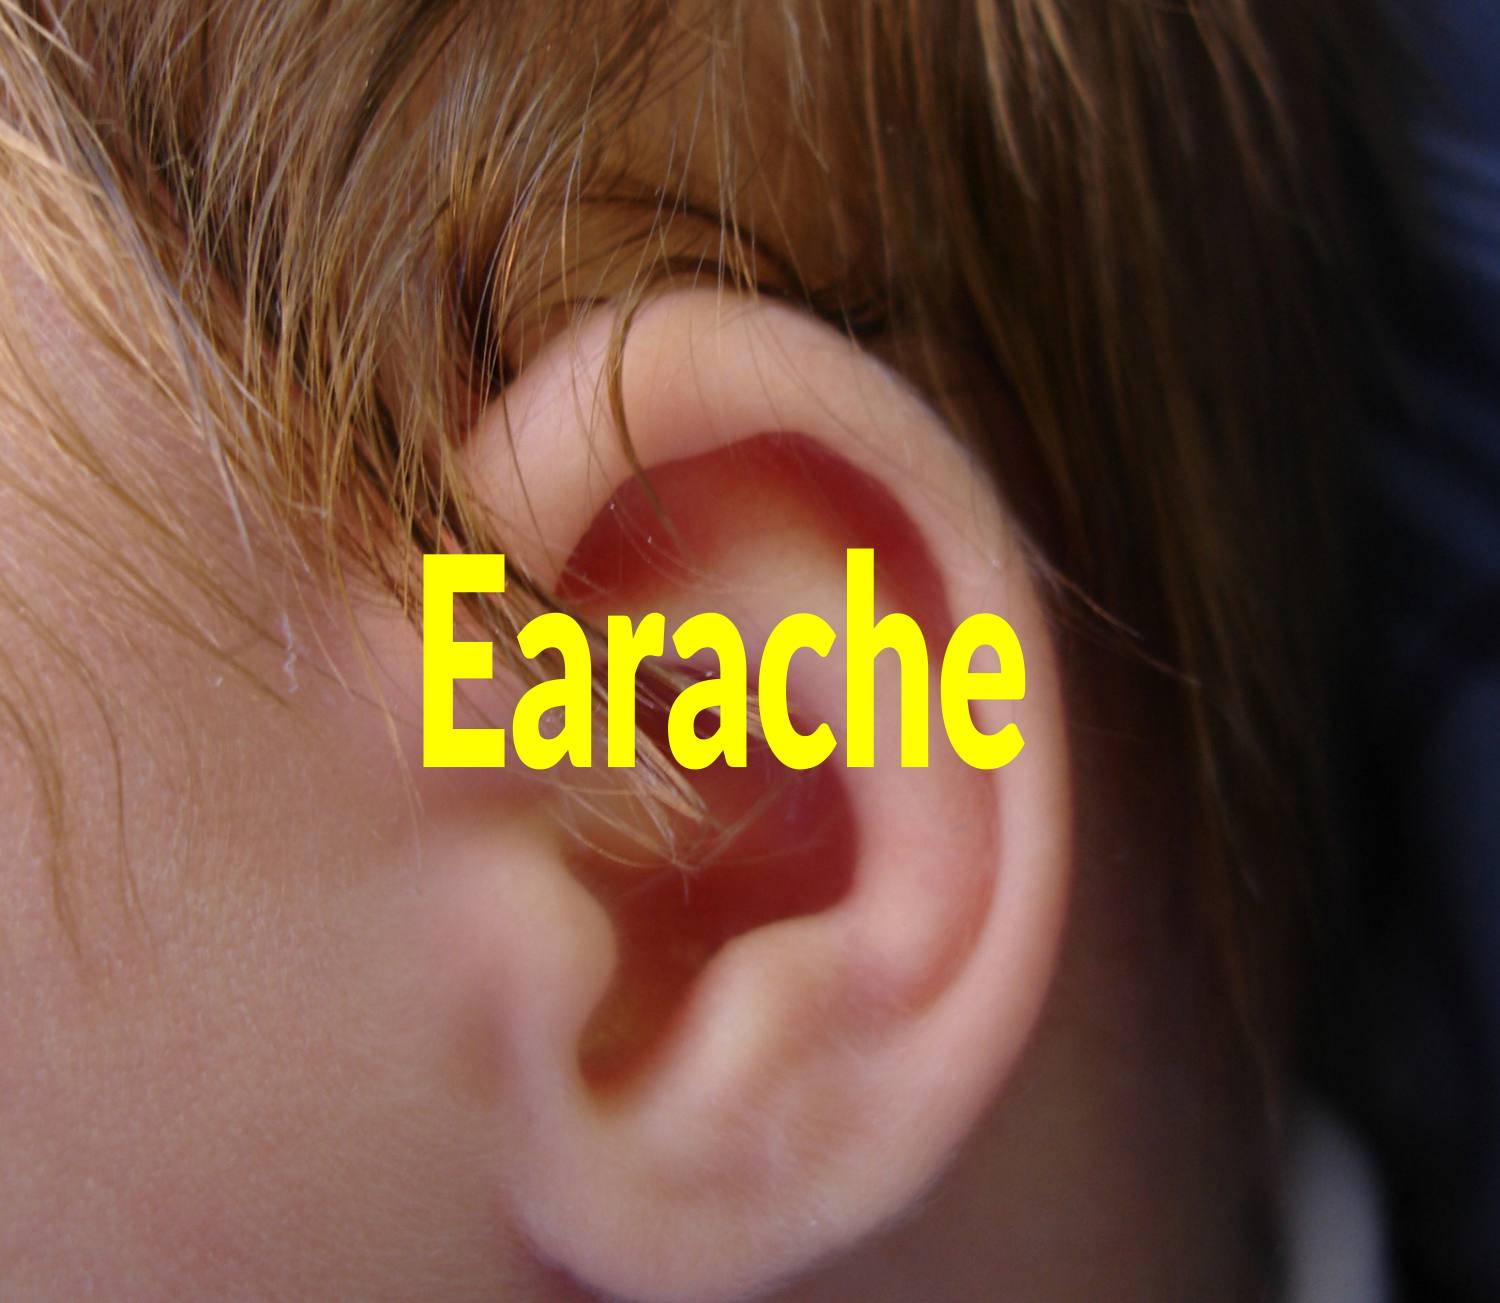 10 Home Remedies for Earcache